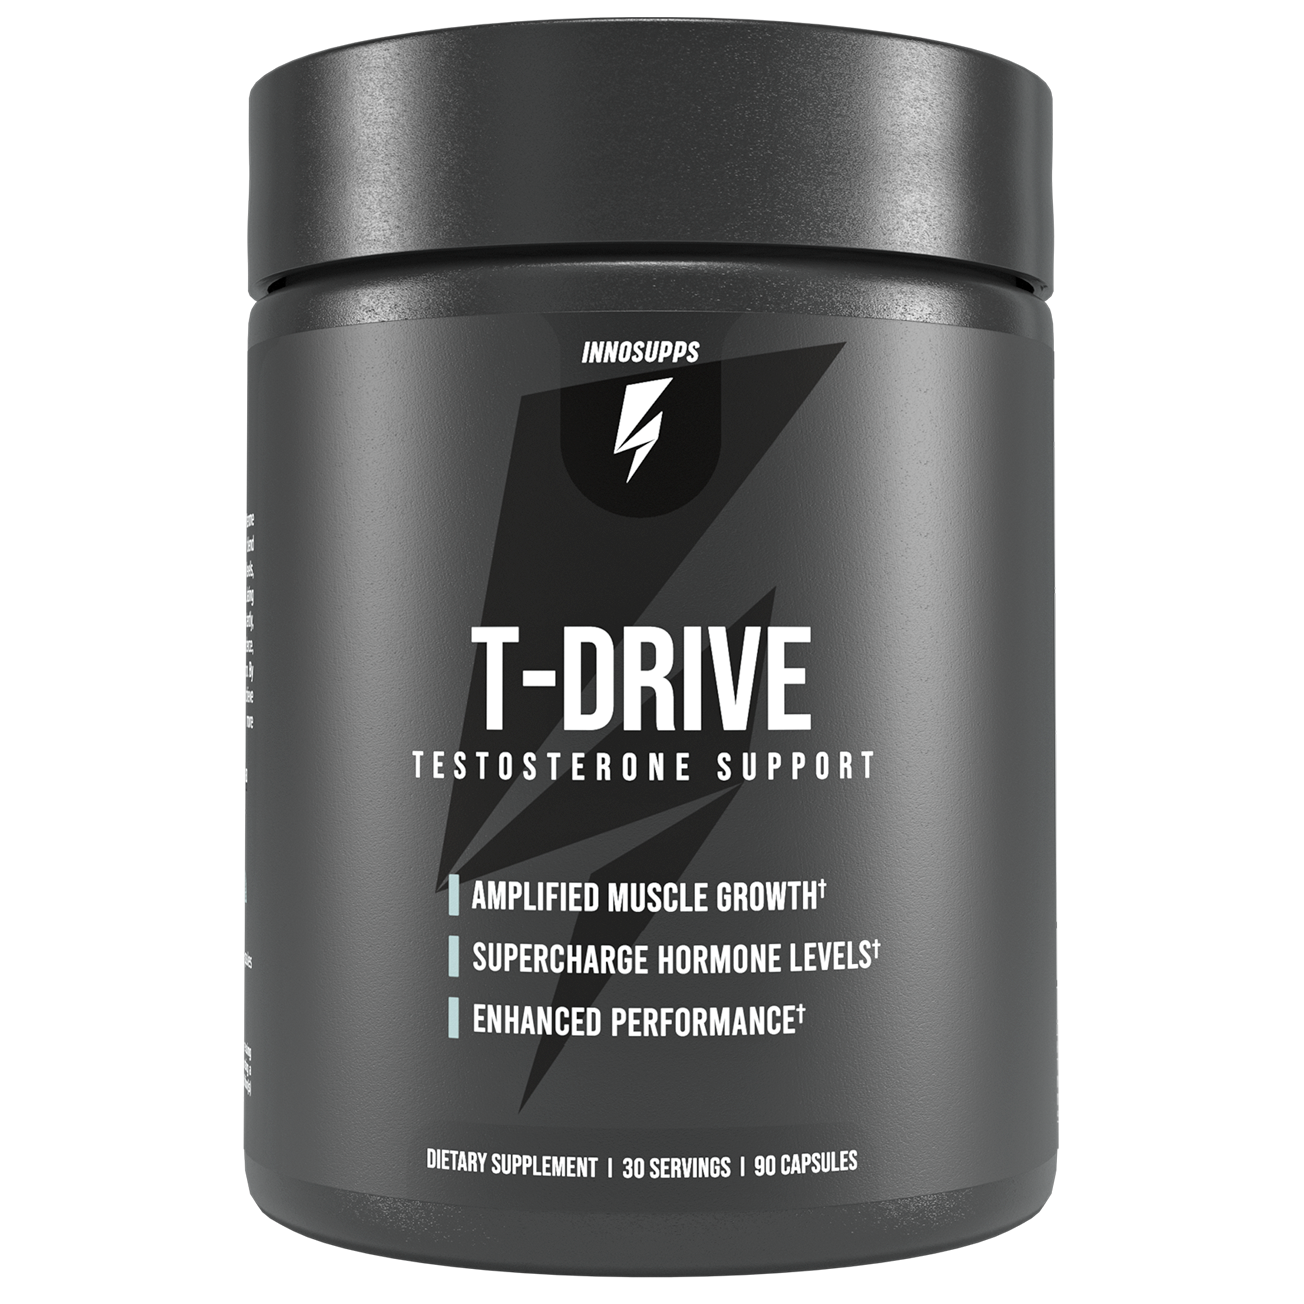 T-Drive Inno Supps Reviews - What is T-Drive Inno Supps?